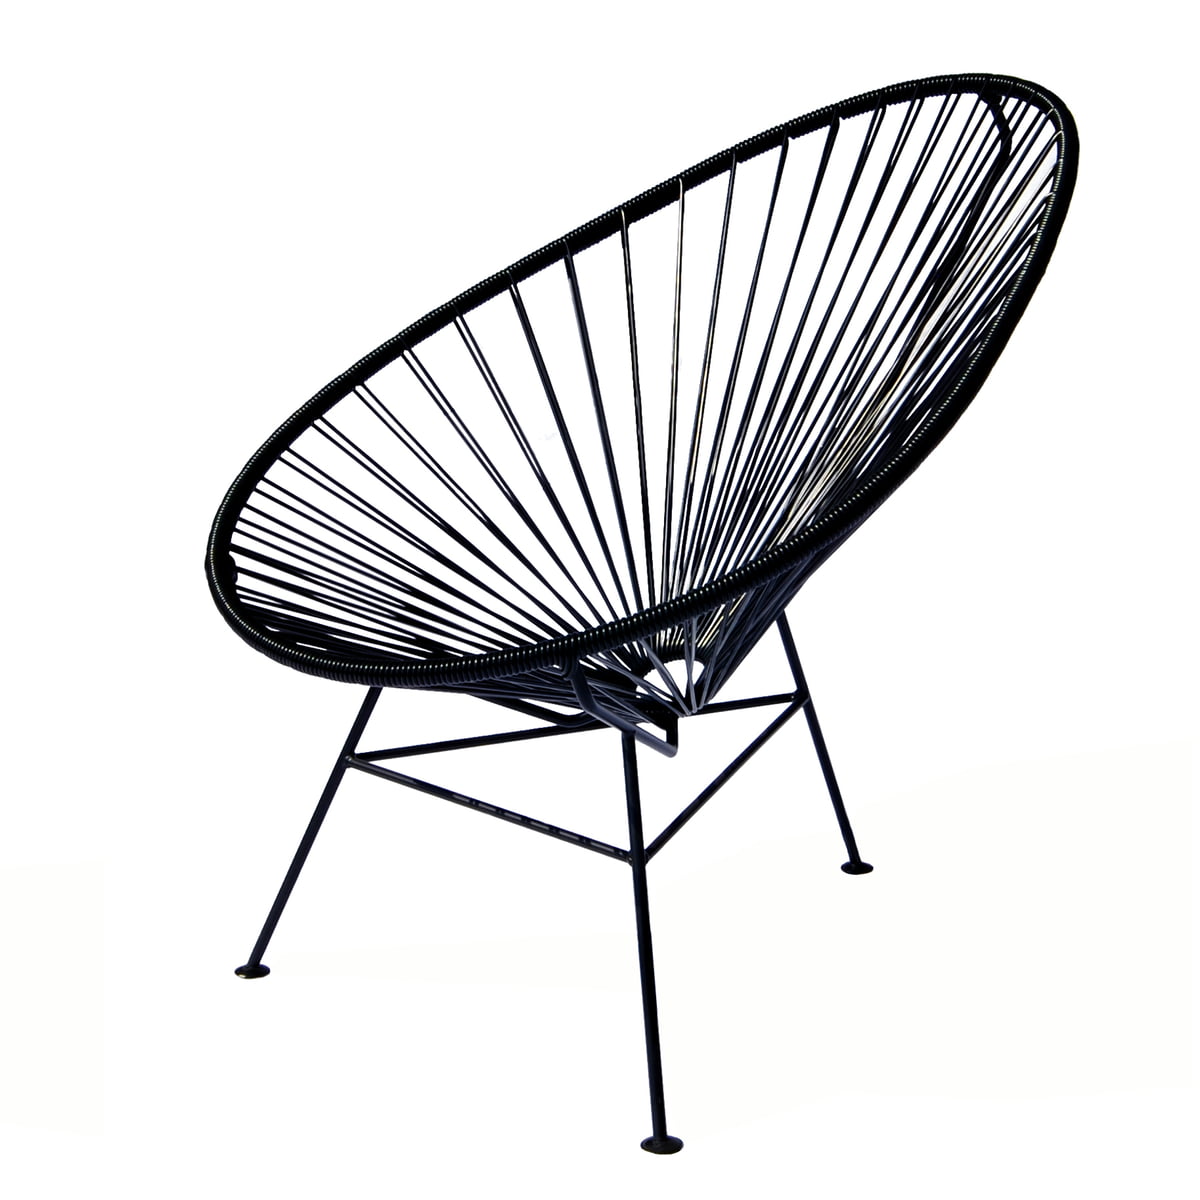 The OK Design Acapulco Chair in the shop